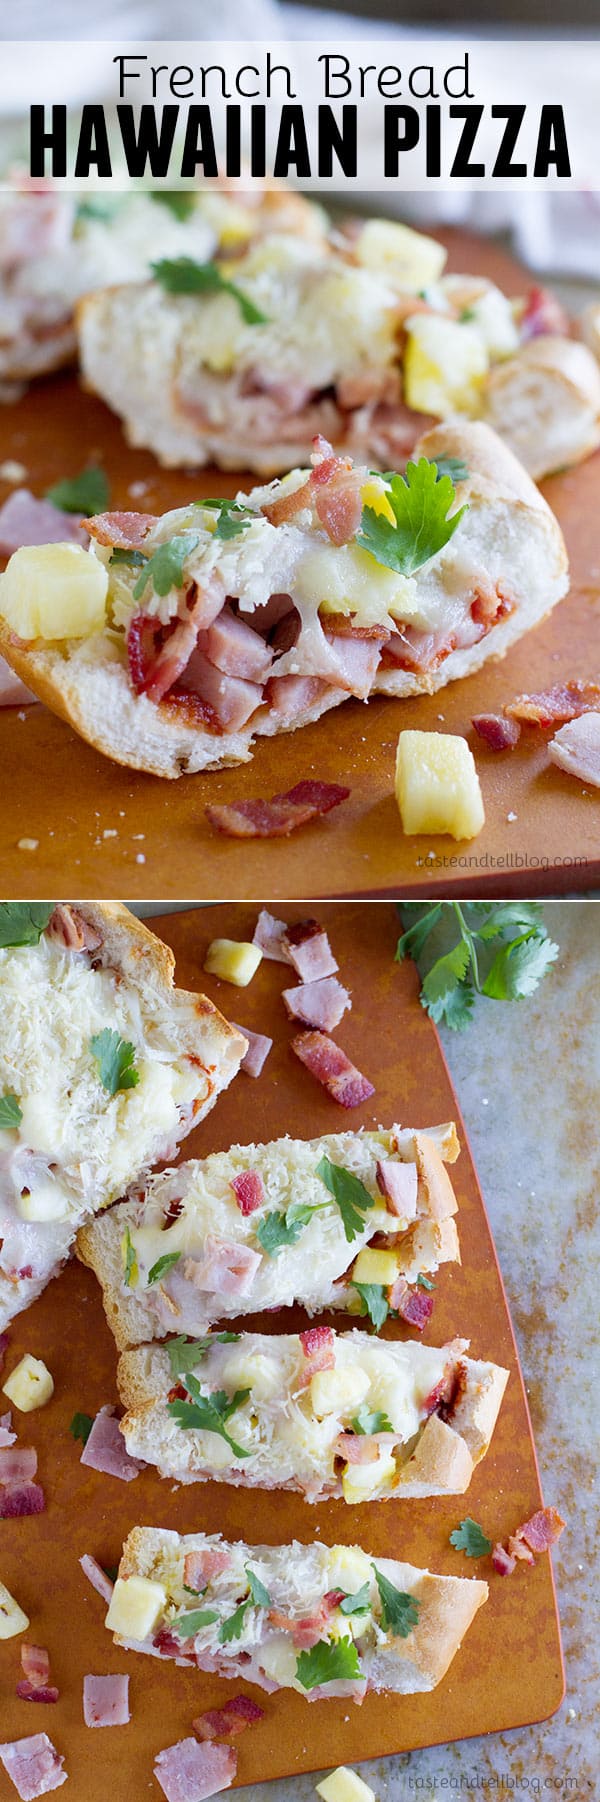 A great use of leftover ham, this French Bread Hawaiian Pizza has ham, bacon, pineapple and lots of cheese, all baked on top of a loaf of French Bread.